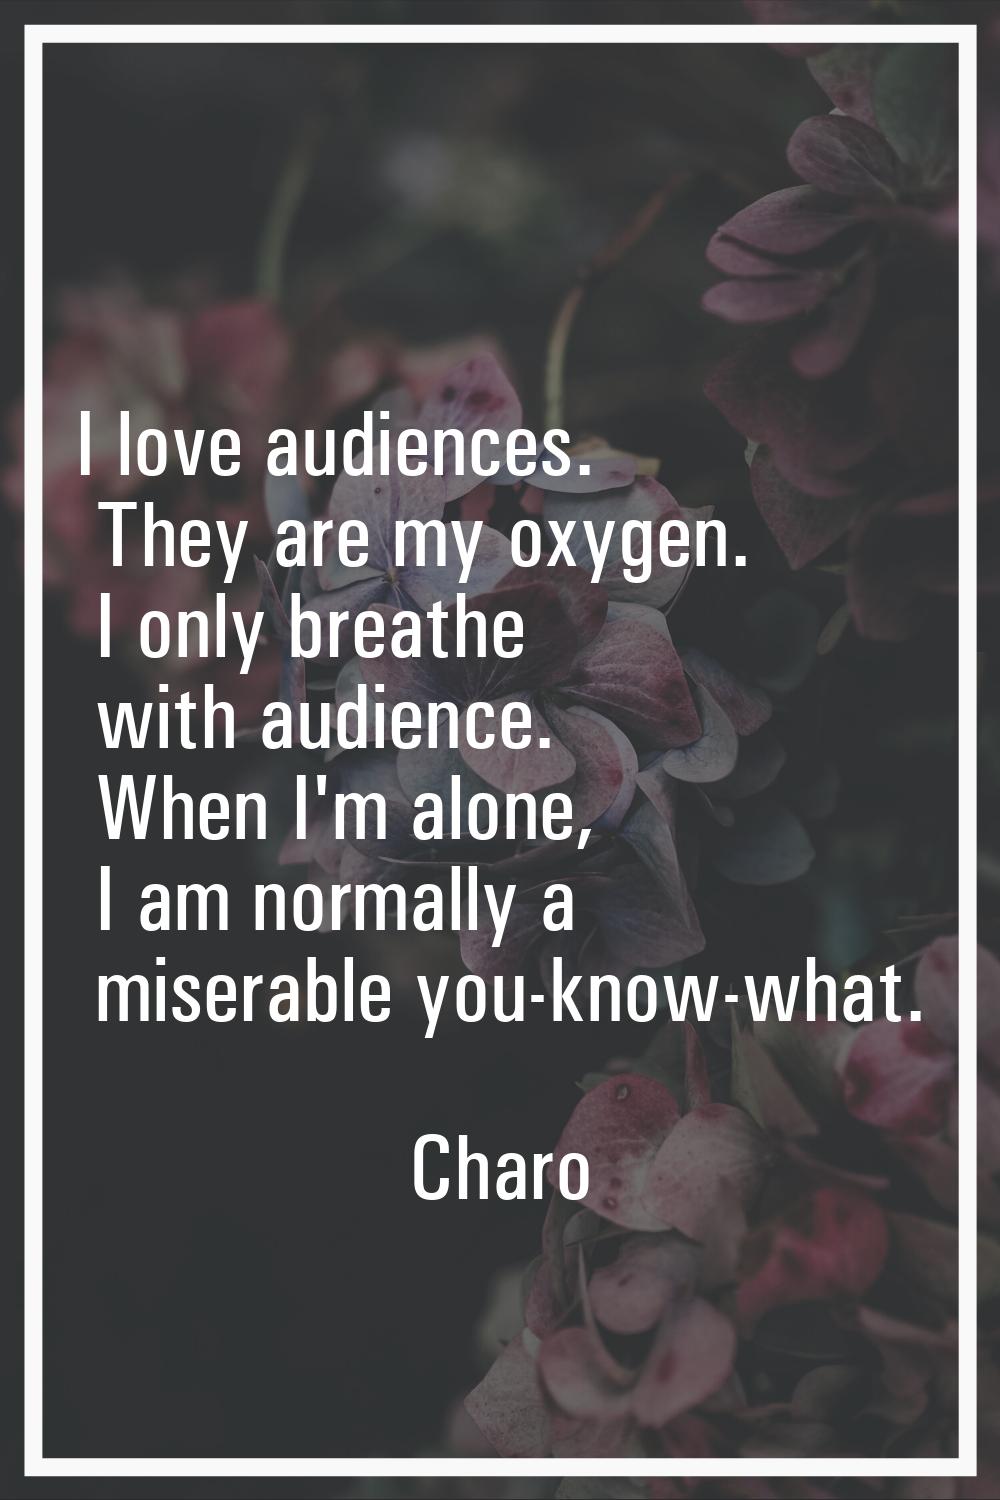 I love audiences. They are my oxygen. I only breathe with audience. When I'm alone, I am normally a